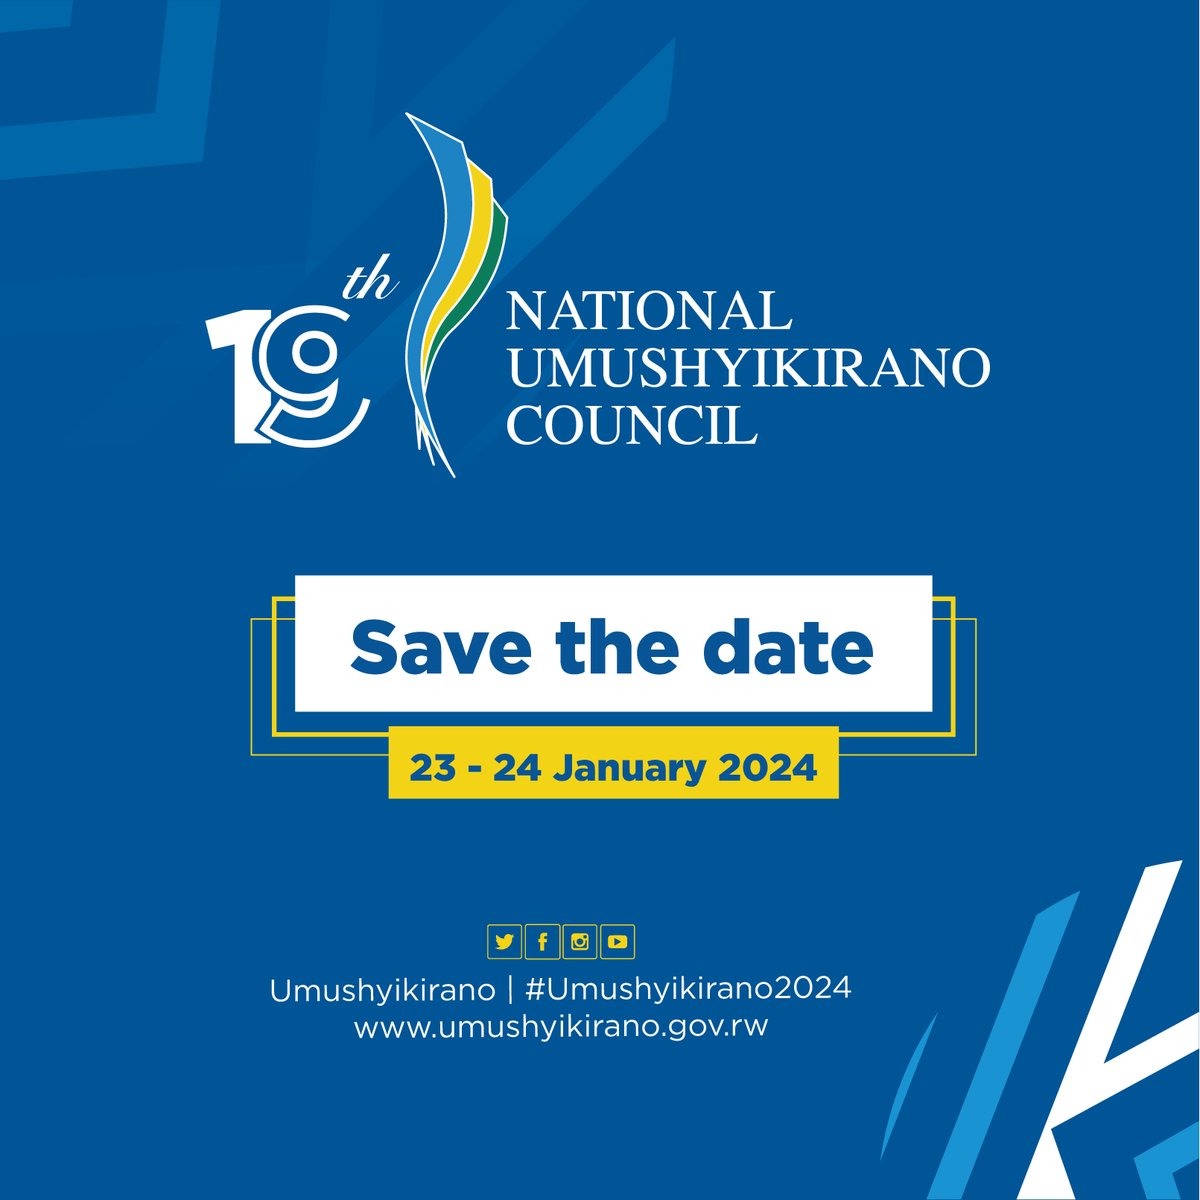 The 19th Umushyikirano takes place on 23-24 January 2024. Join in vital discussions on Rwanda's growth, unity & youth empowerment. Let's review our progress as a nation and together shape a bright future. #Umushyikirano2024 #RwandaWorks